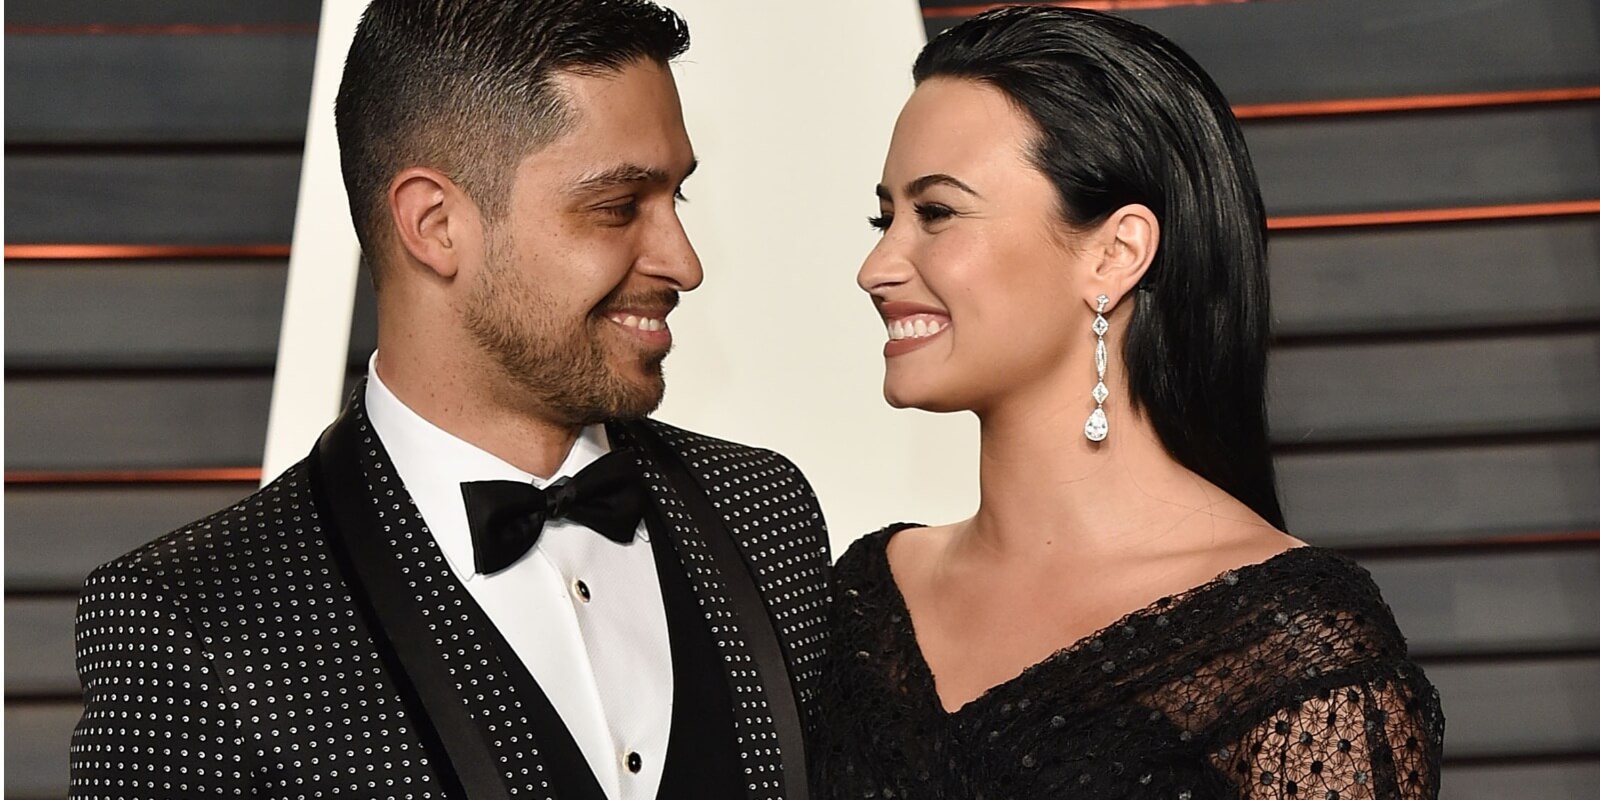 Wilmer Valderrama and Demi Lovato at the Vanity Fair Oscar Party in 2016.